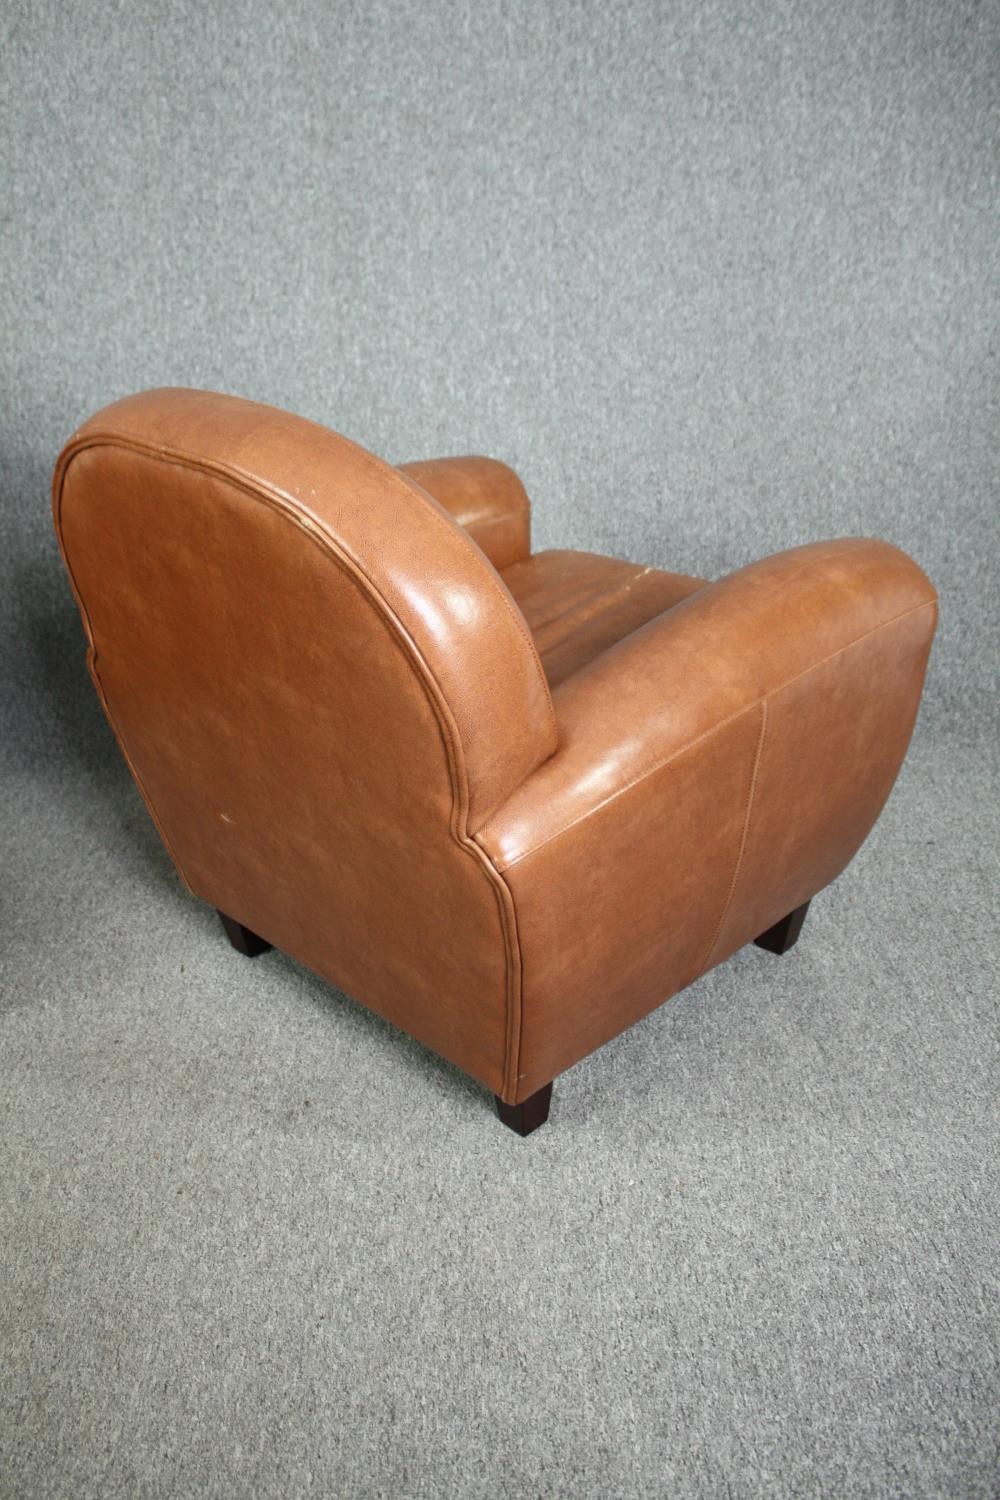 Armchairs, Art Deco style upholstered in faux leather. H.85 W.86 D.78cm. (Each) (Worn as seen). - Image 4 of 7